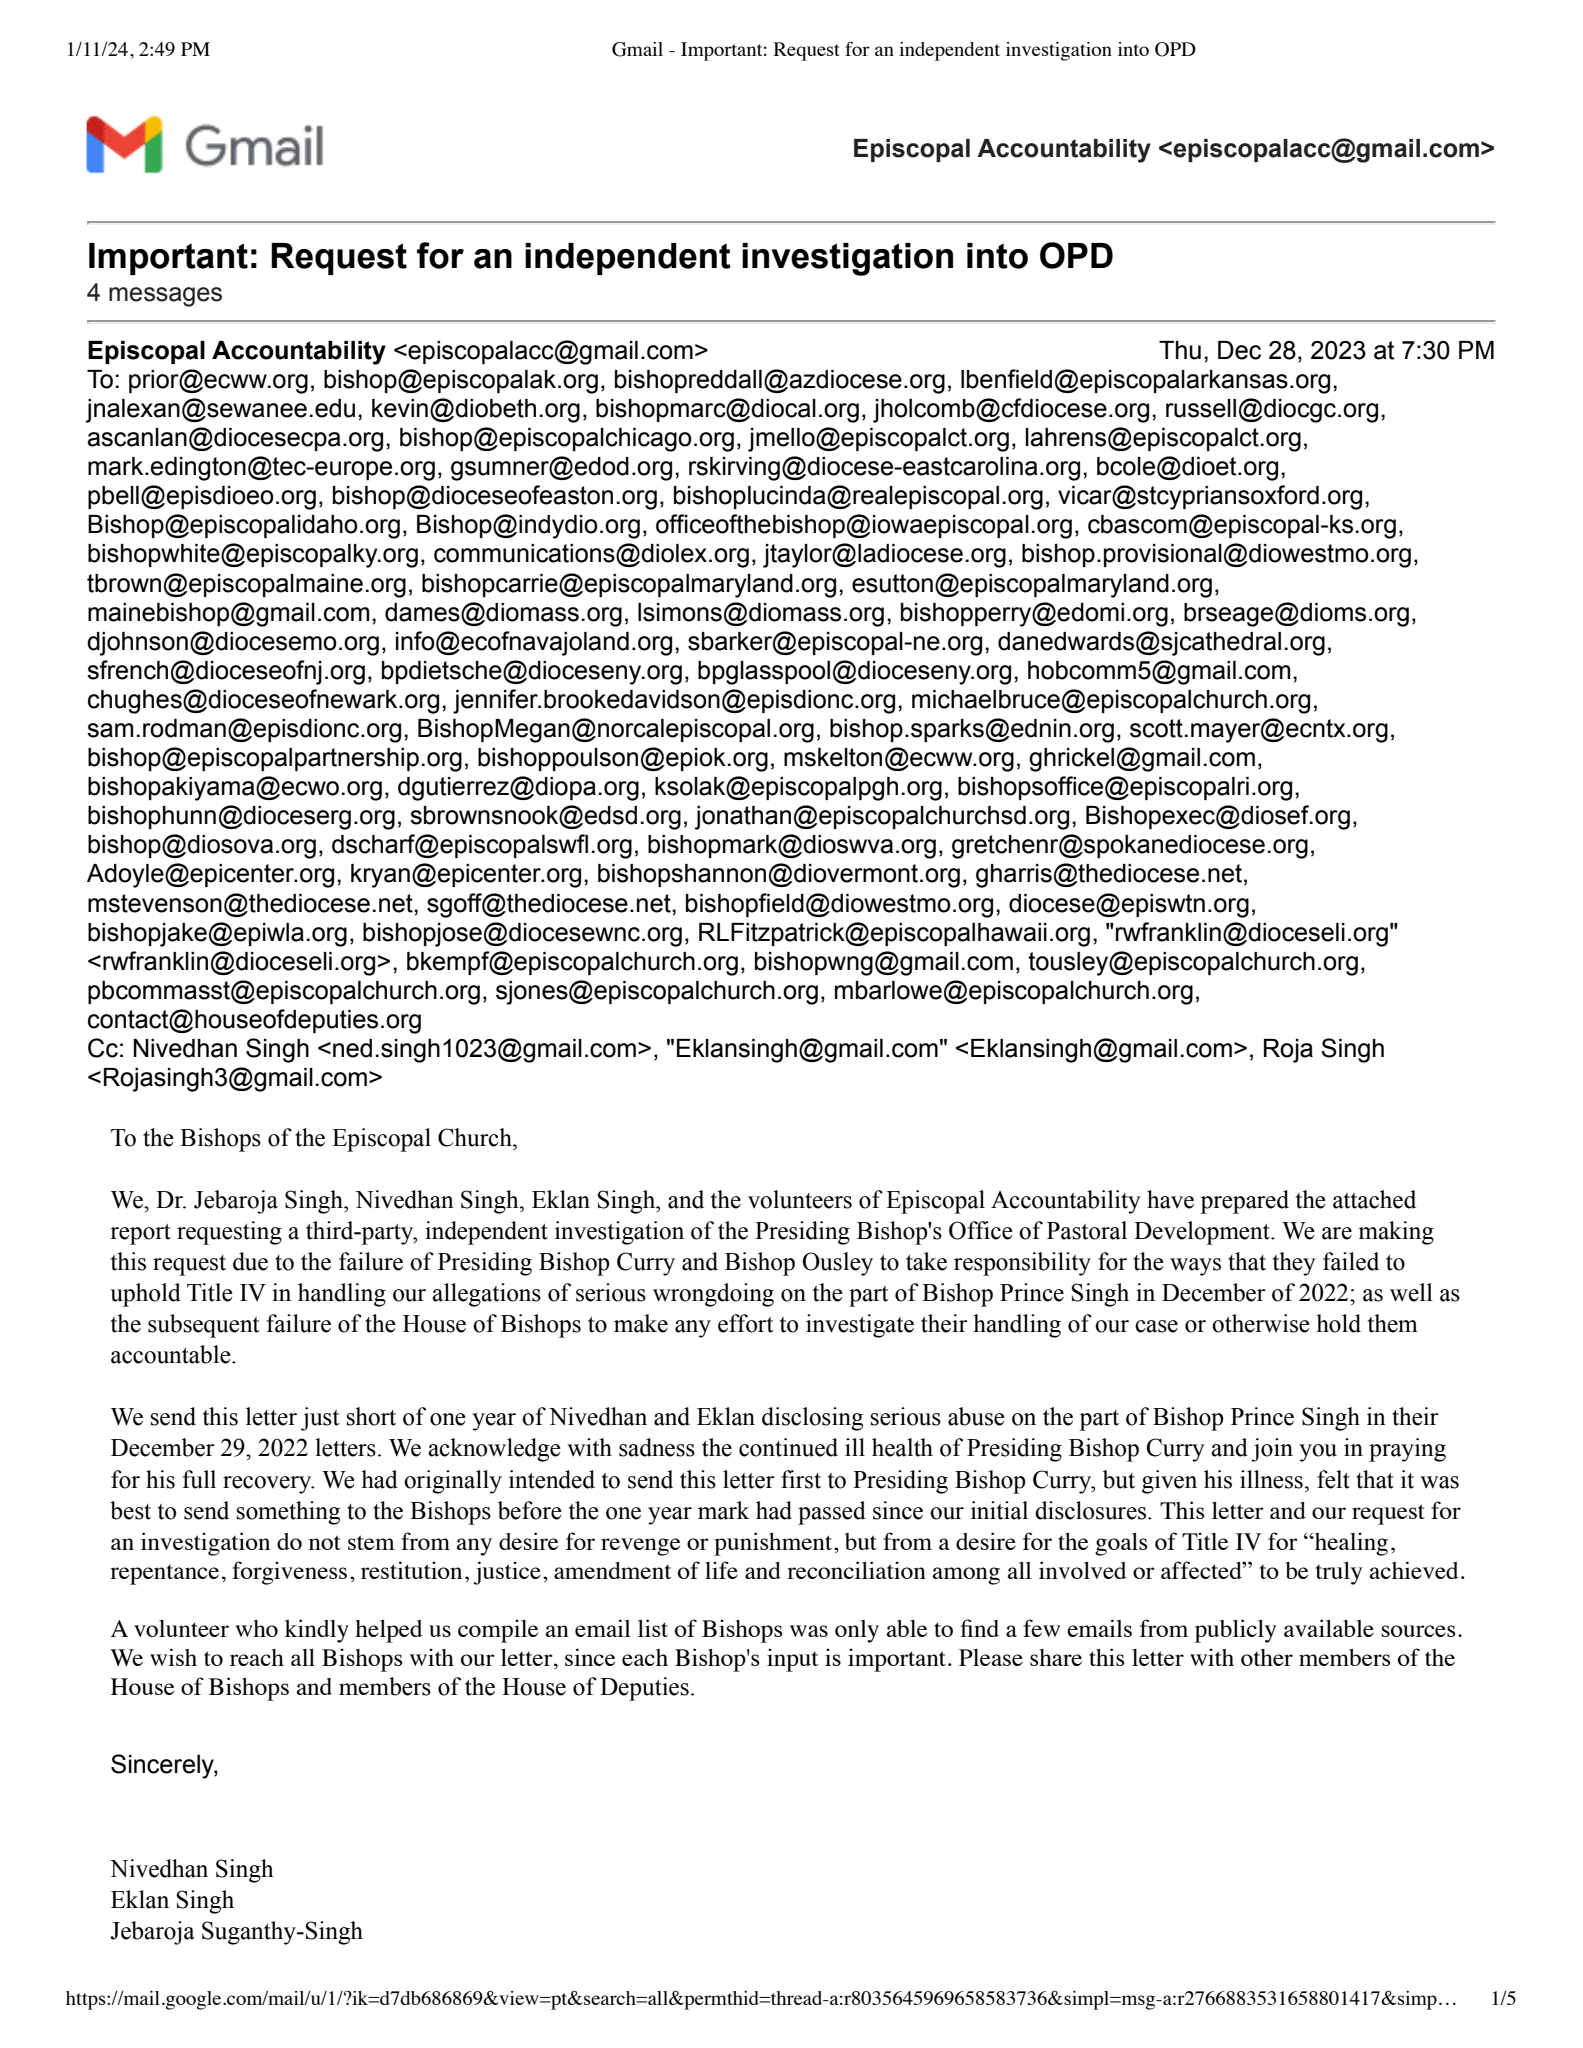 Investigation request email - Page 1